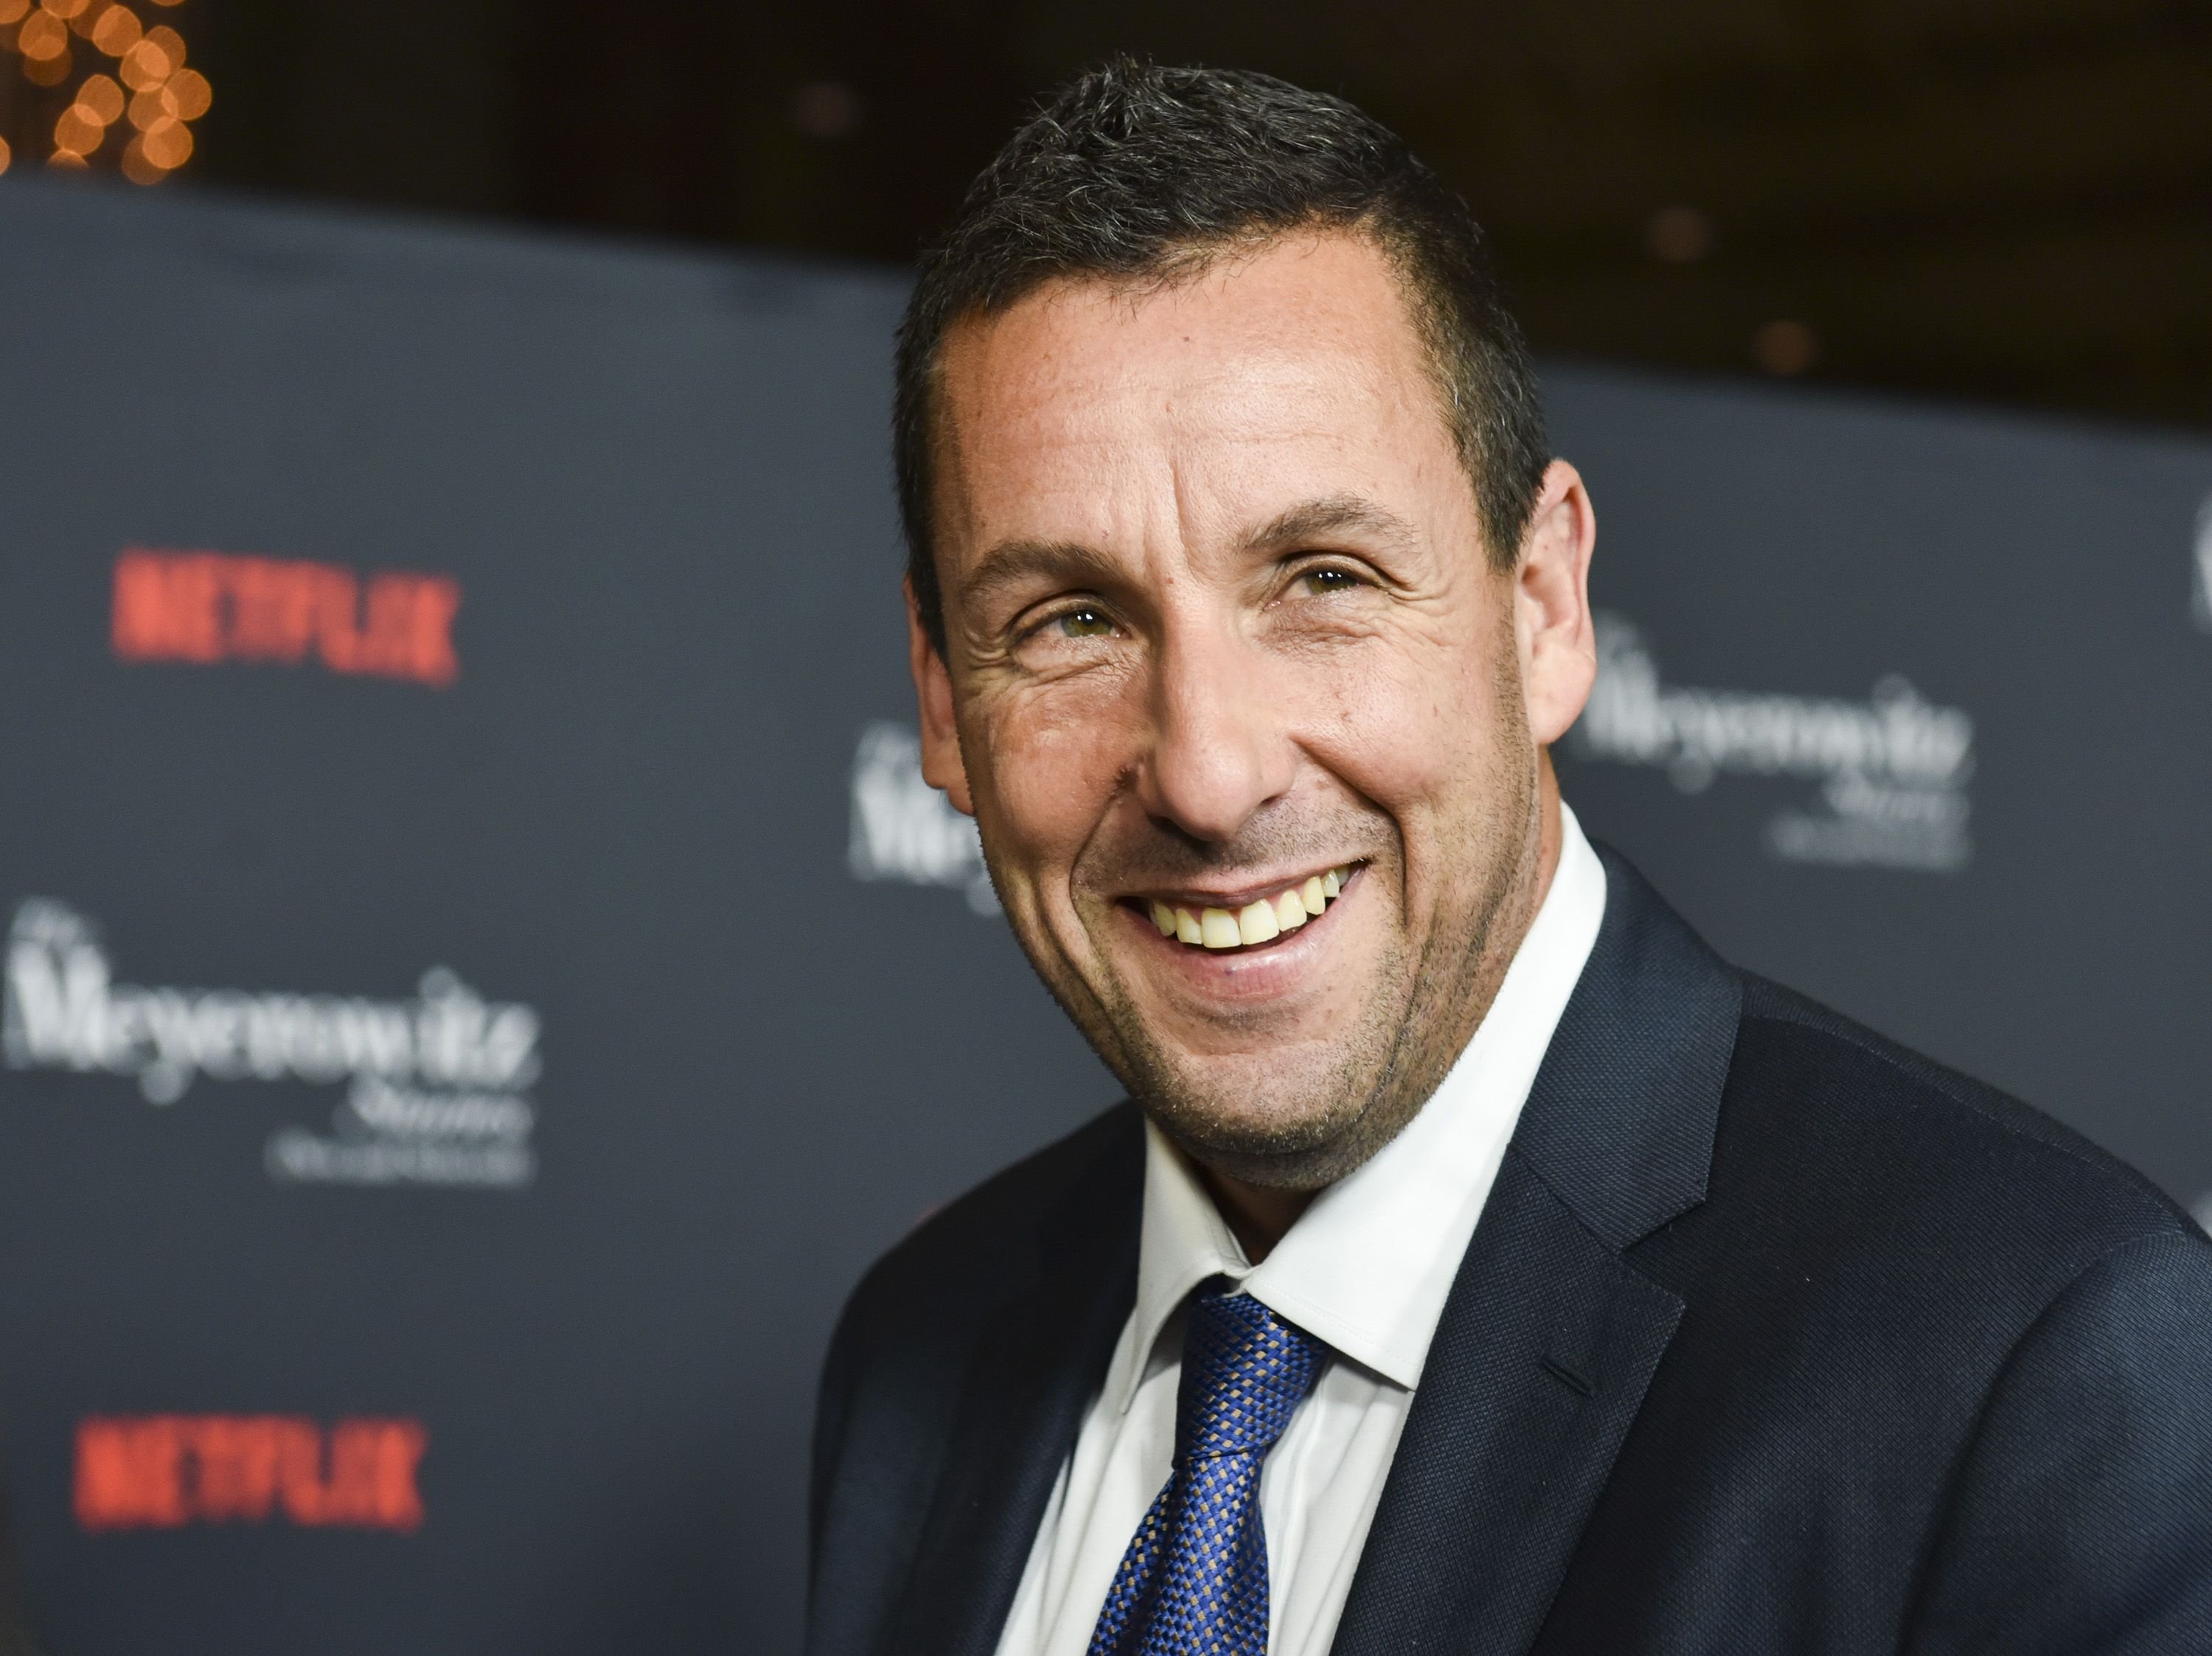 Adam Sandler at the screening of Netflix's "The Meyerowitz Stories (New And Selected)" on October 11, 2017, in Los Angeles, California | Photo: Rodin Eckenroth/Getty Images